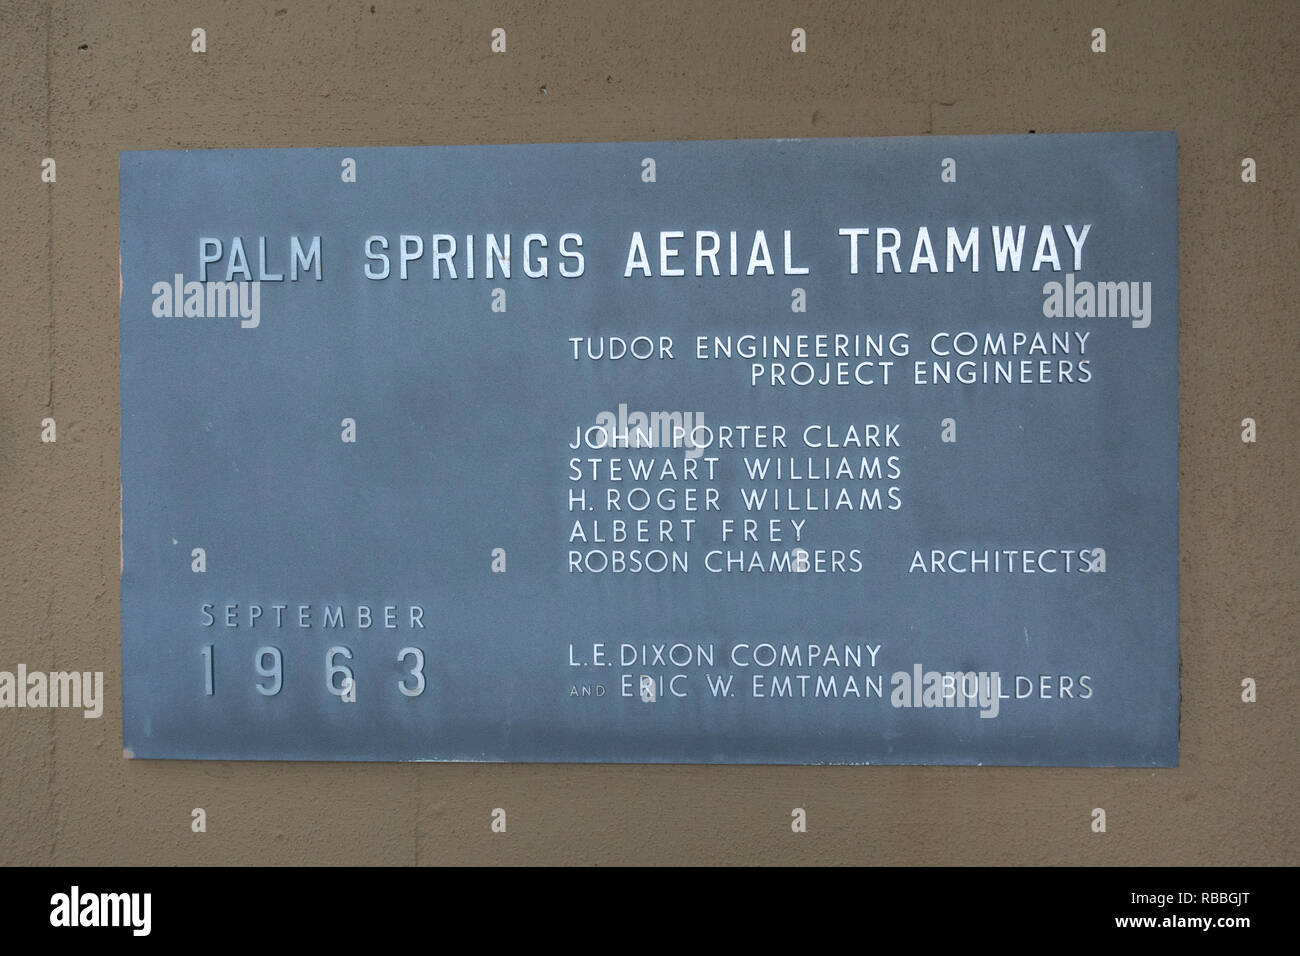 Plaque dedicating the engineers and architects of the Palm Springs Aerial Tramway in September 1963, CA, USA. Stock Photo